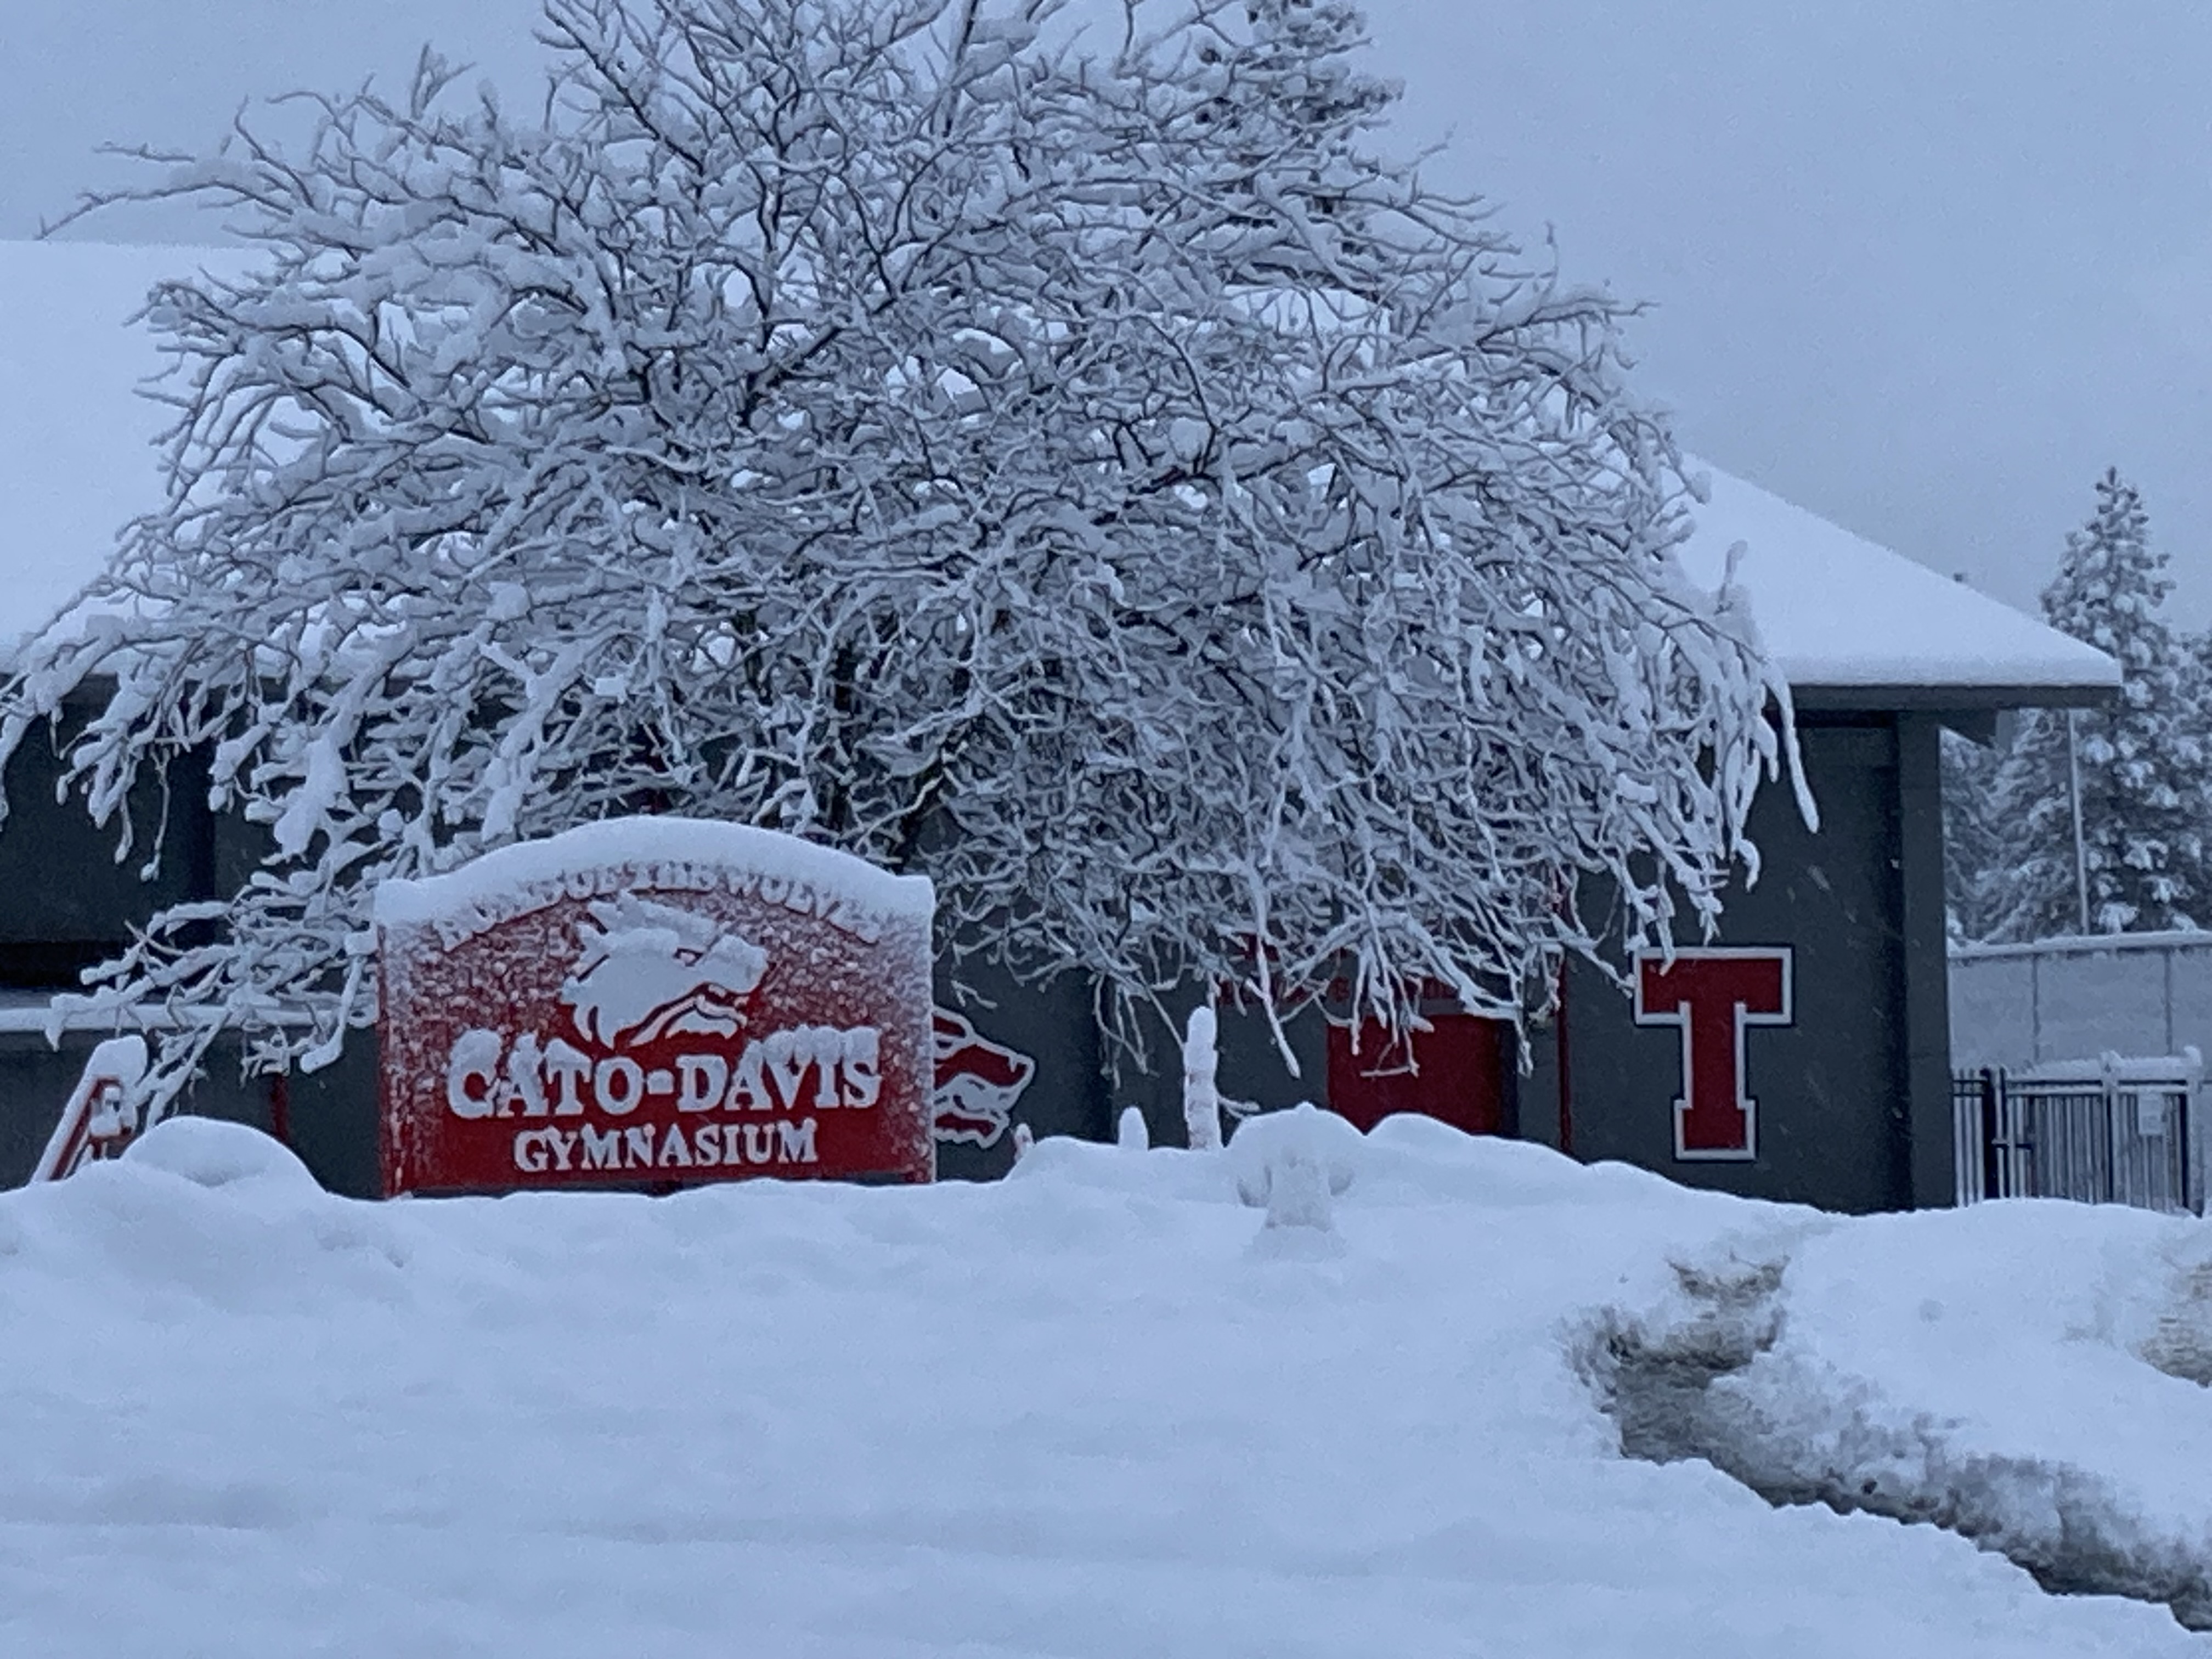 image of cato-davis gym in the snow